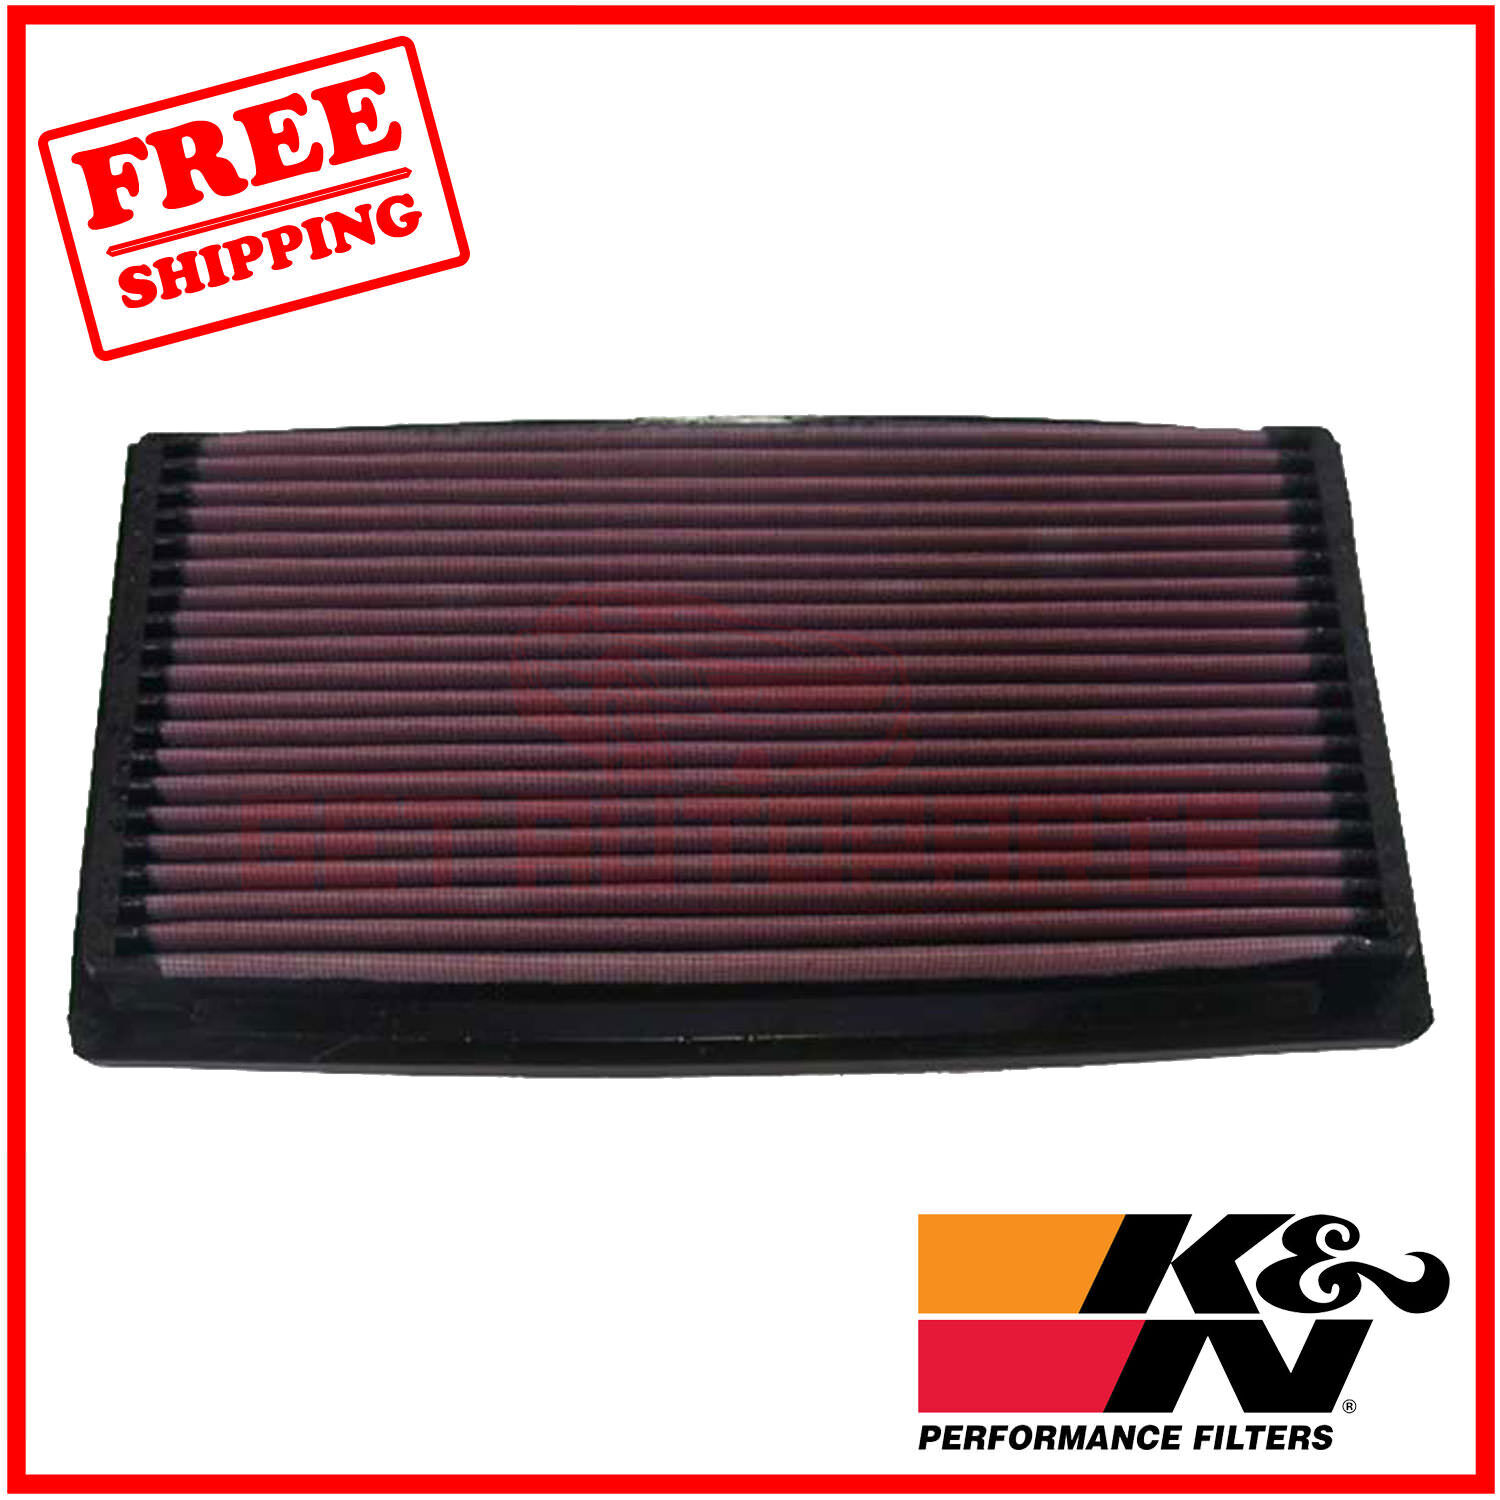 K&N Replacement Air Filter for Ford Bronco II 1988-1990